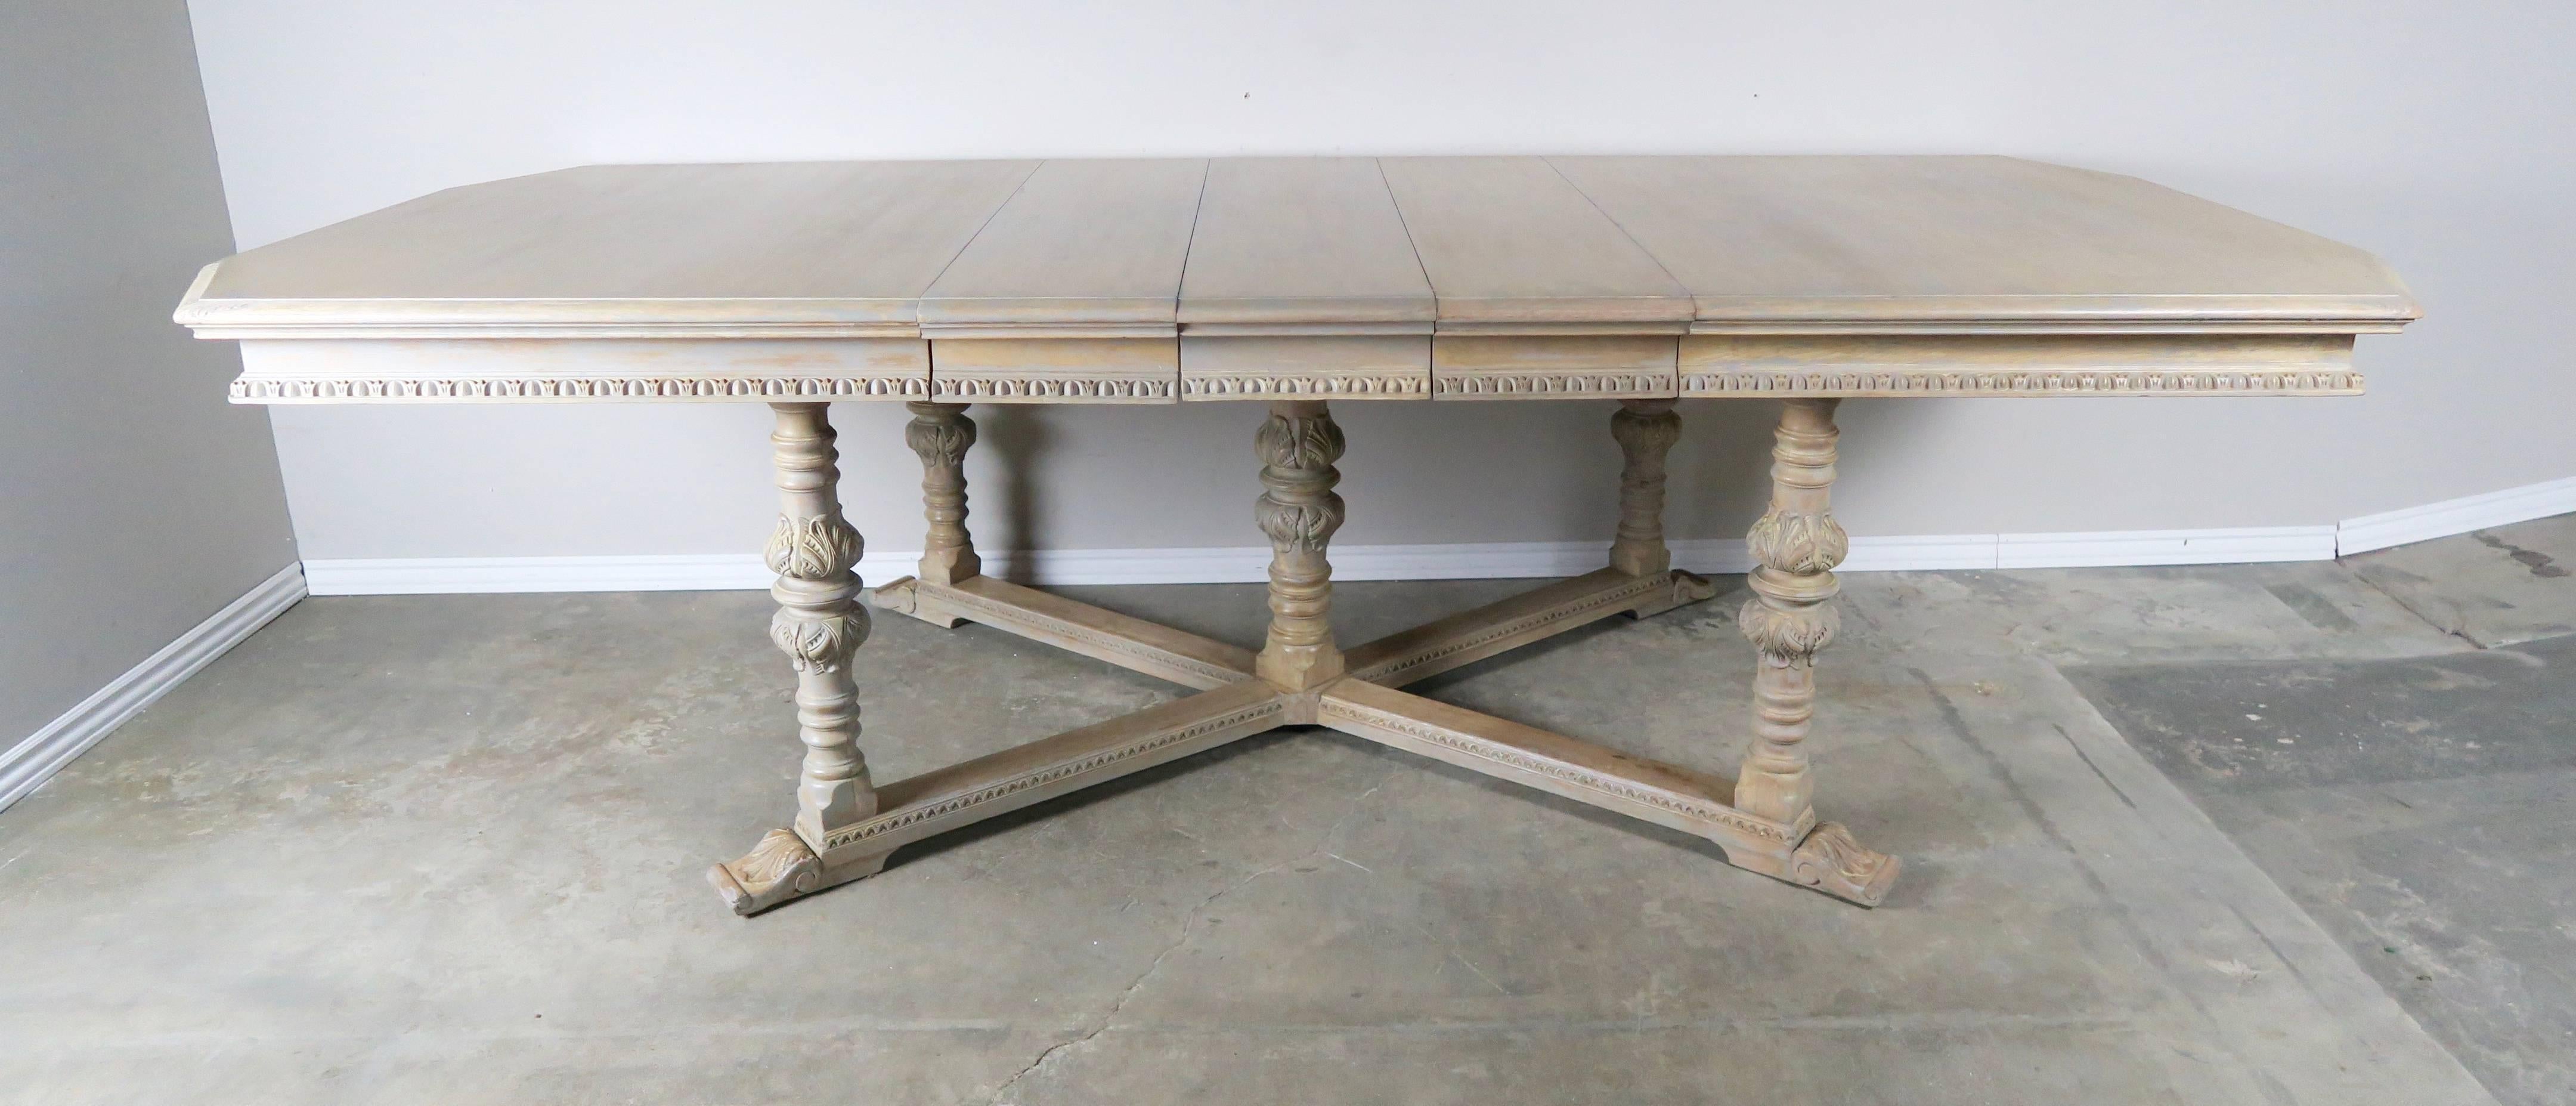 Italian Neoclassical Style Dining Room Table with Leaves 1